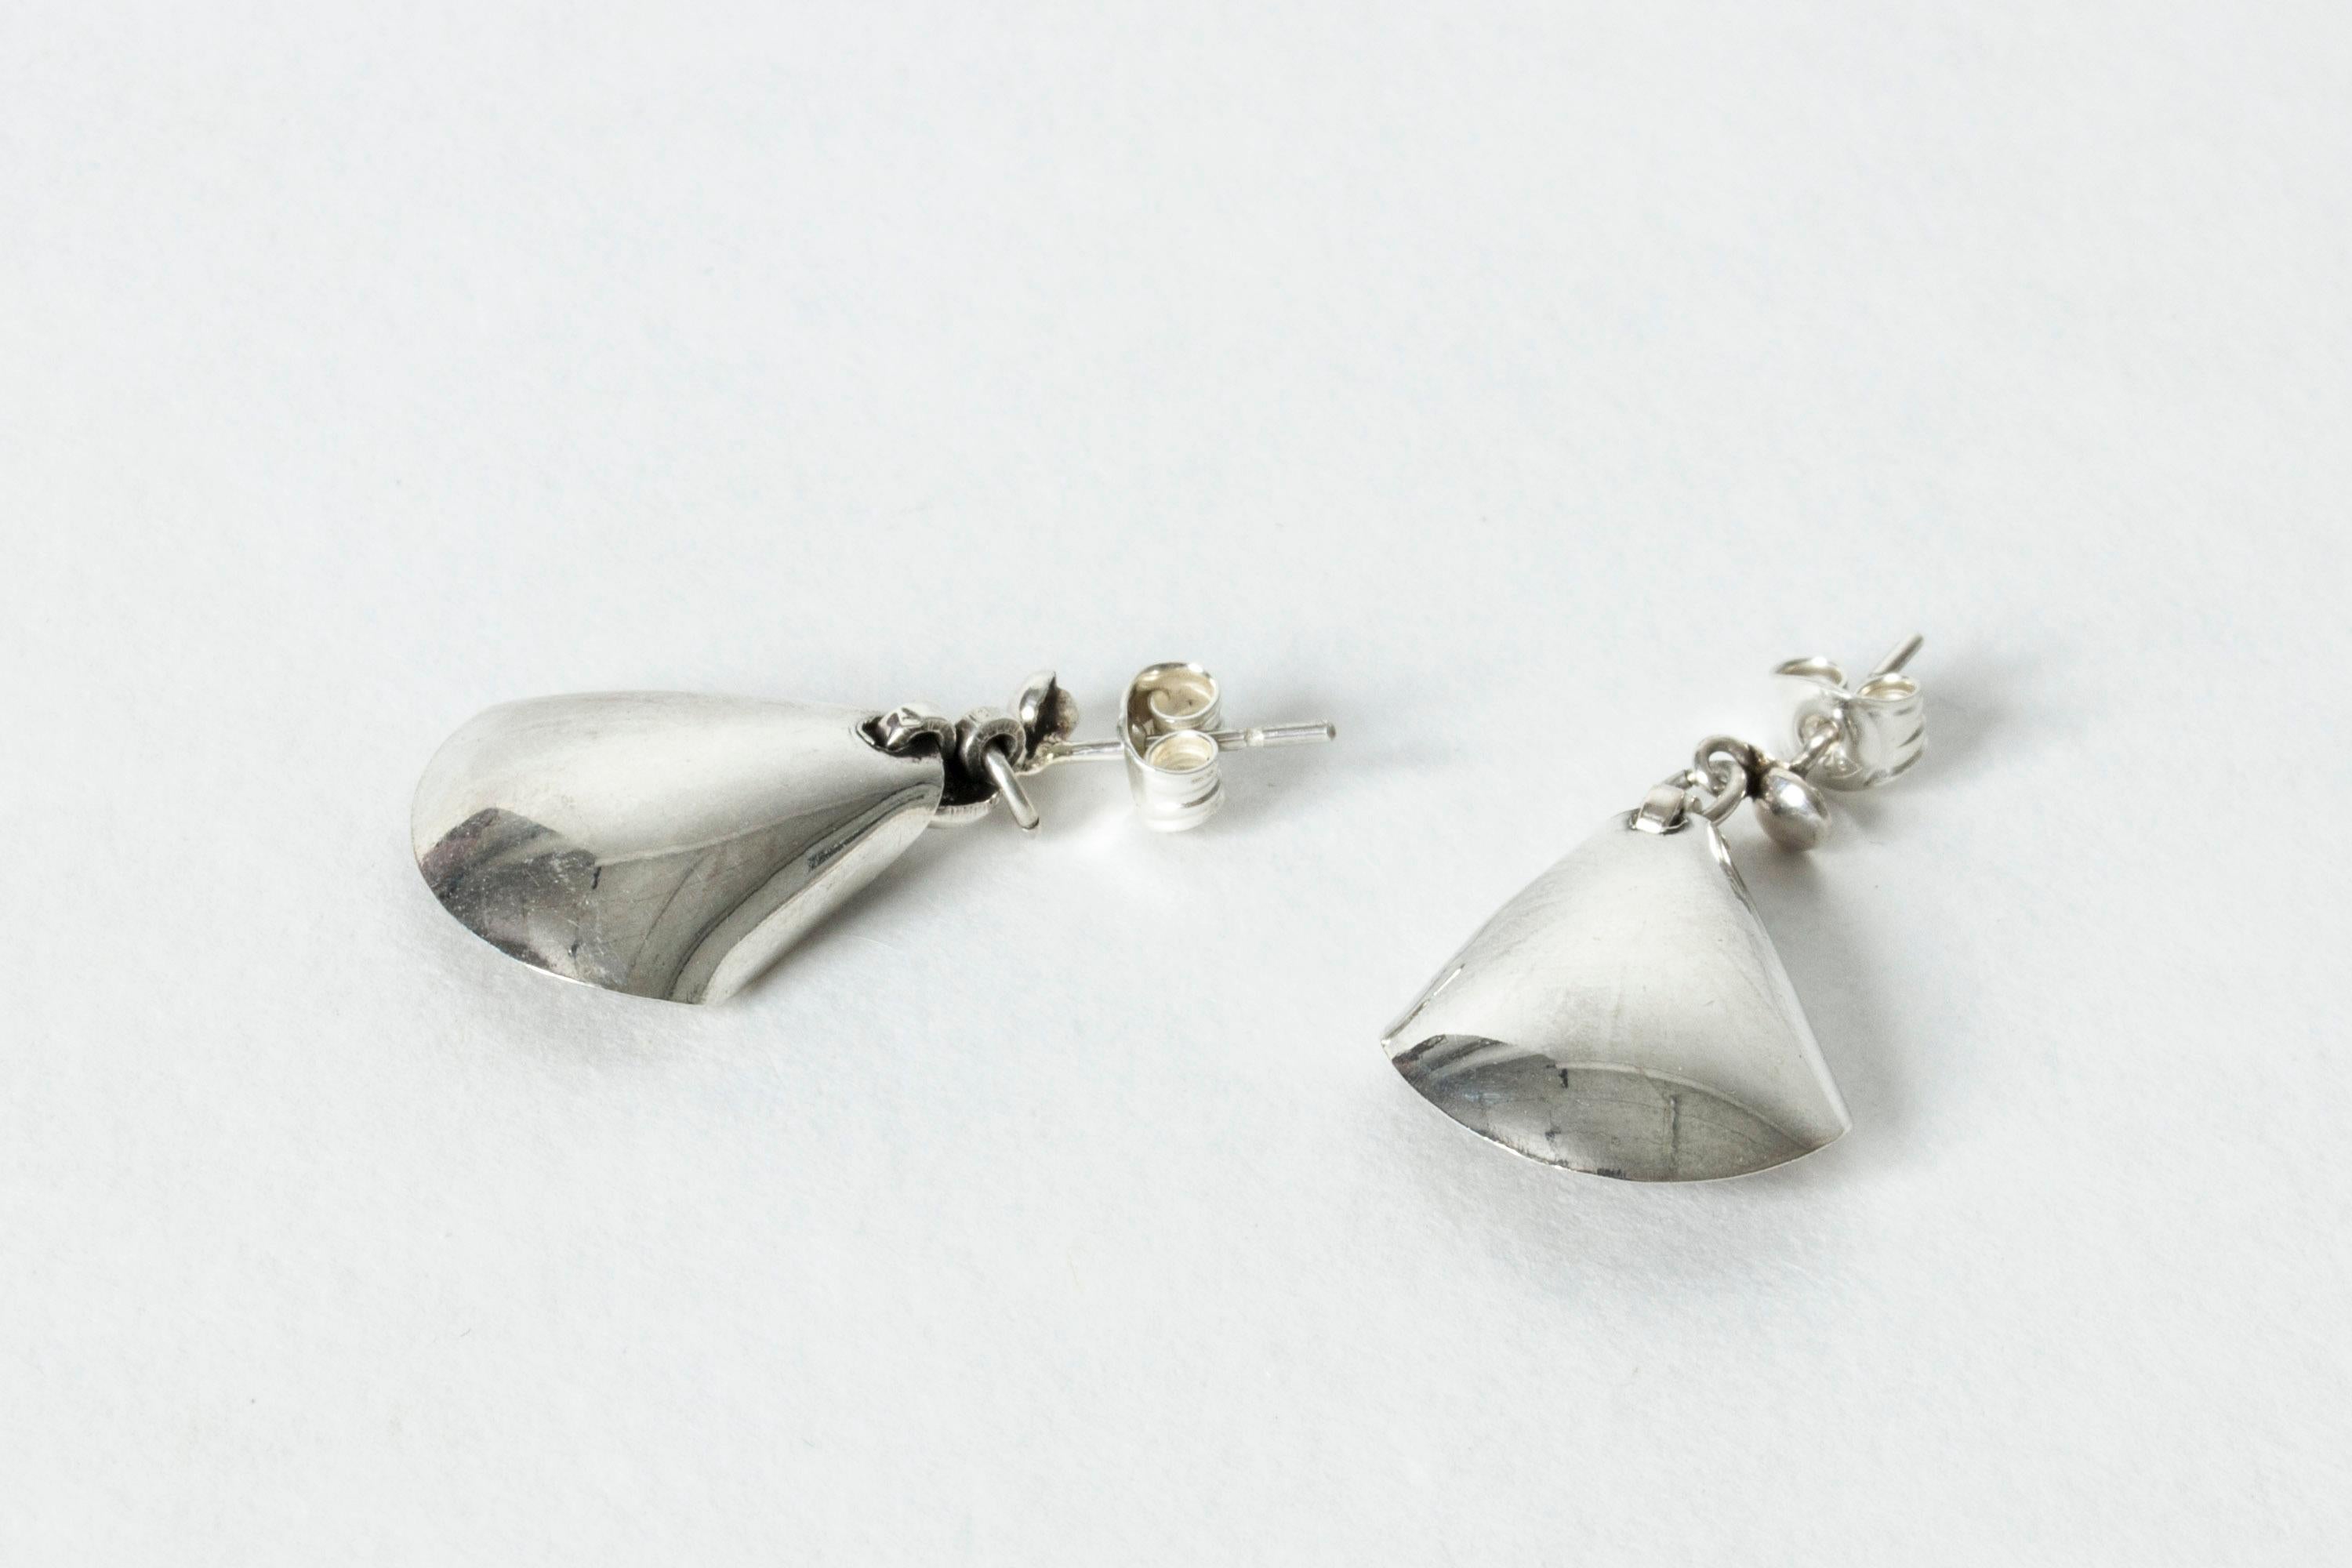 Vintage Scandinavian Modernist Silver and Chalcedony Earrings, Sweden, 1960s For Sale 1